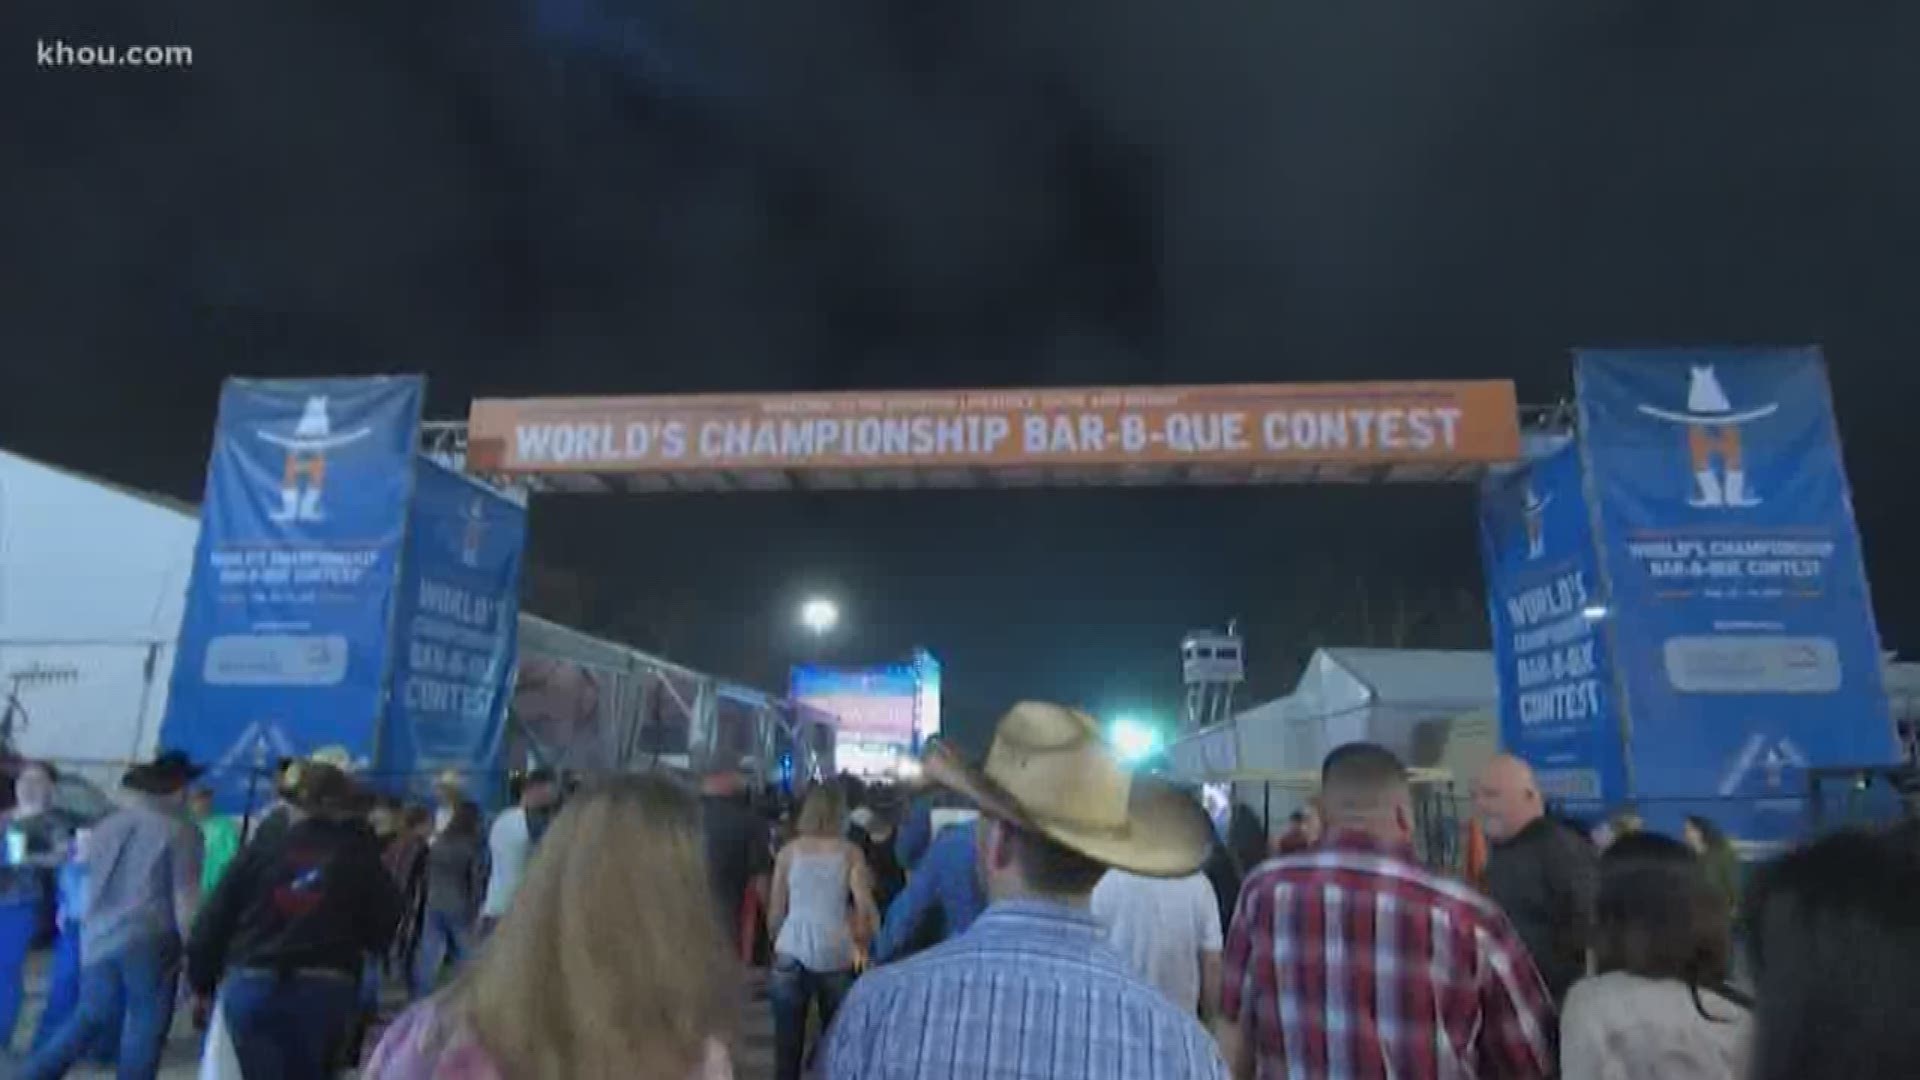 Houston Rodeo Cookoff begins Thursday